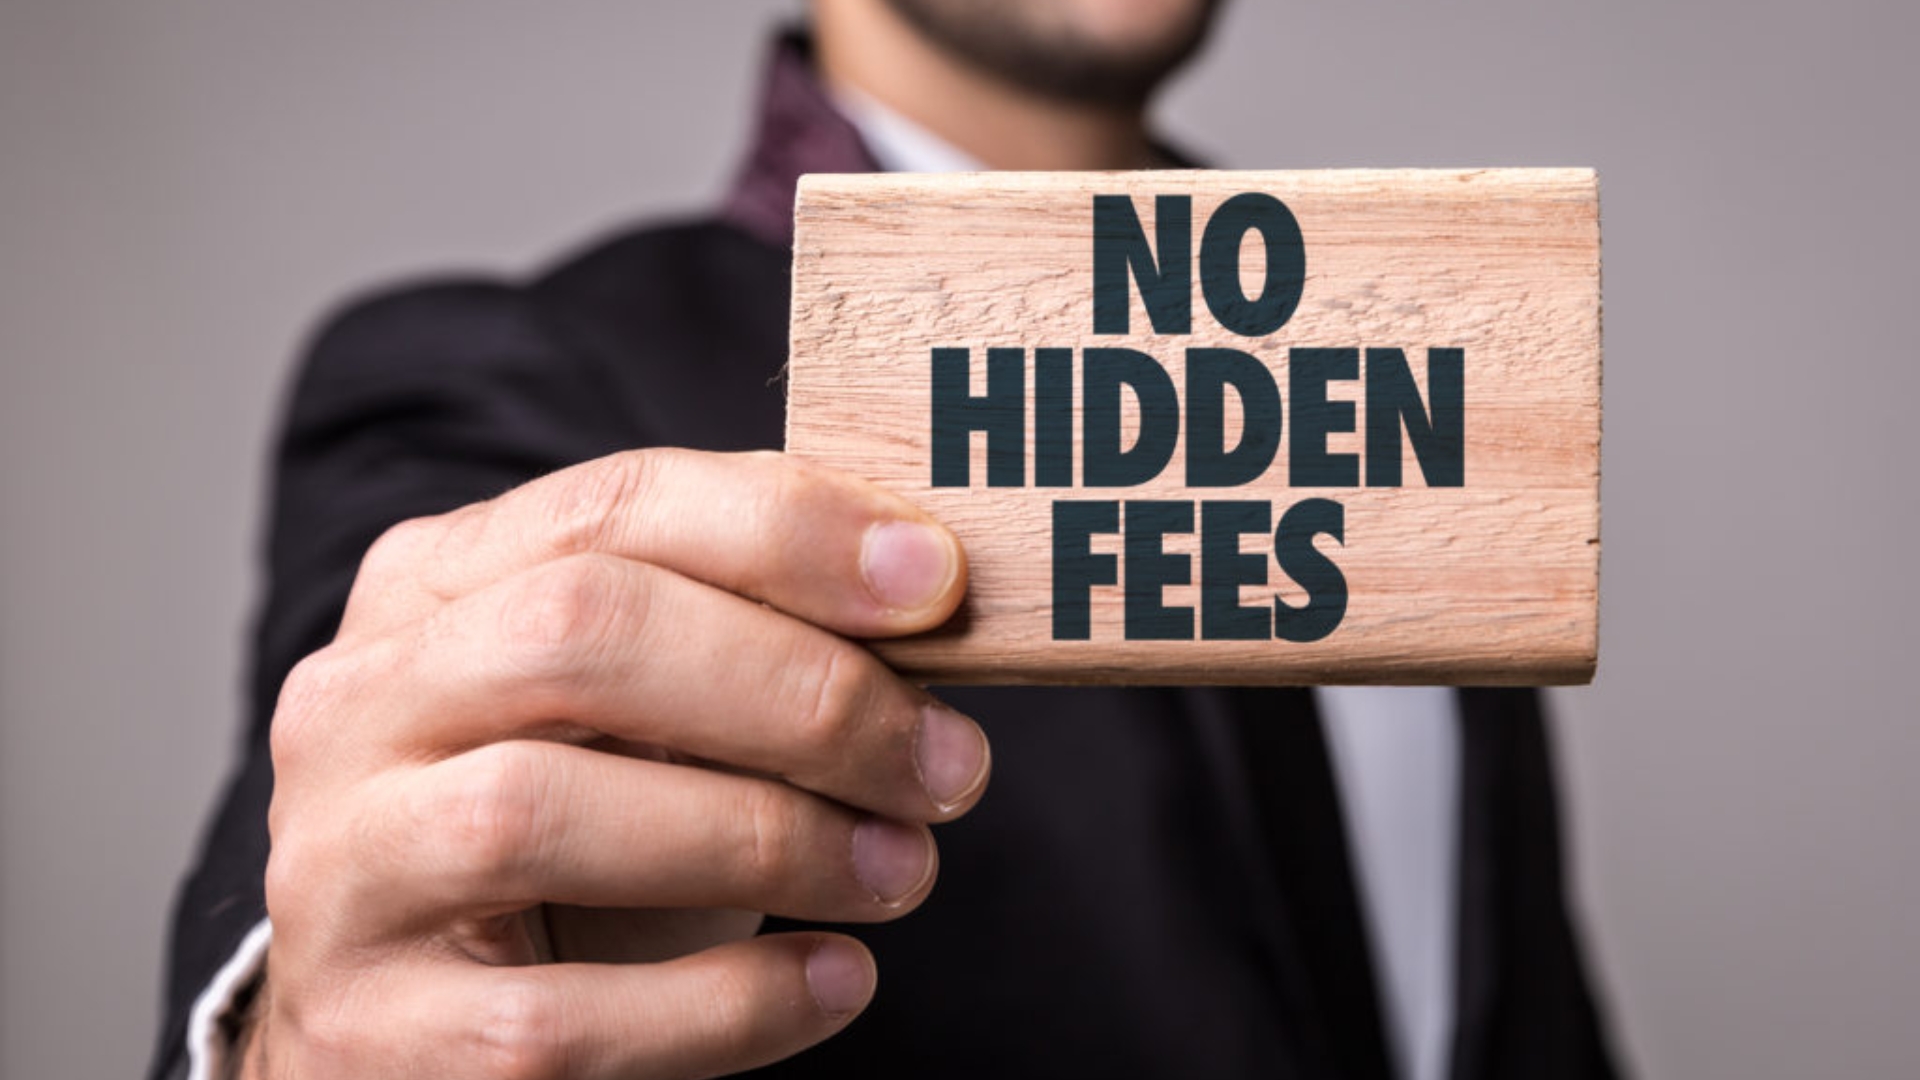 A man holding a signage that says "No Hidden Fees"